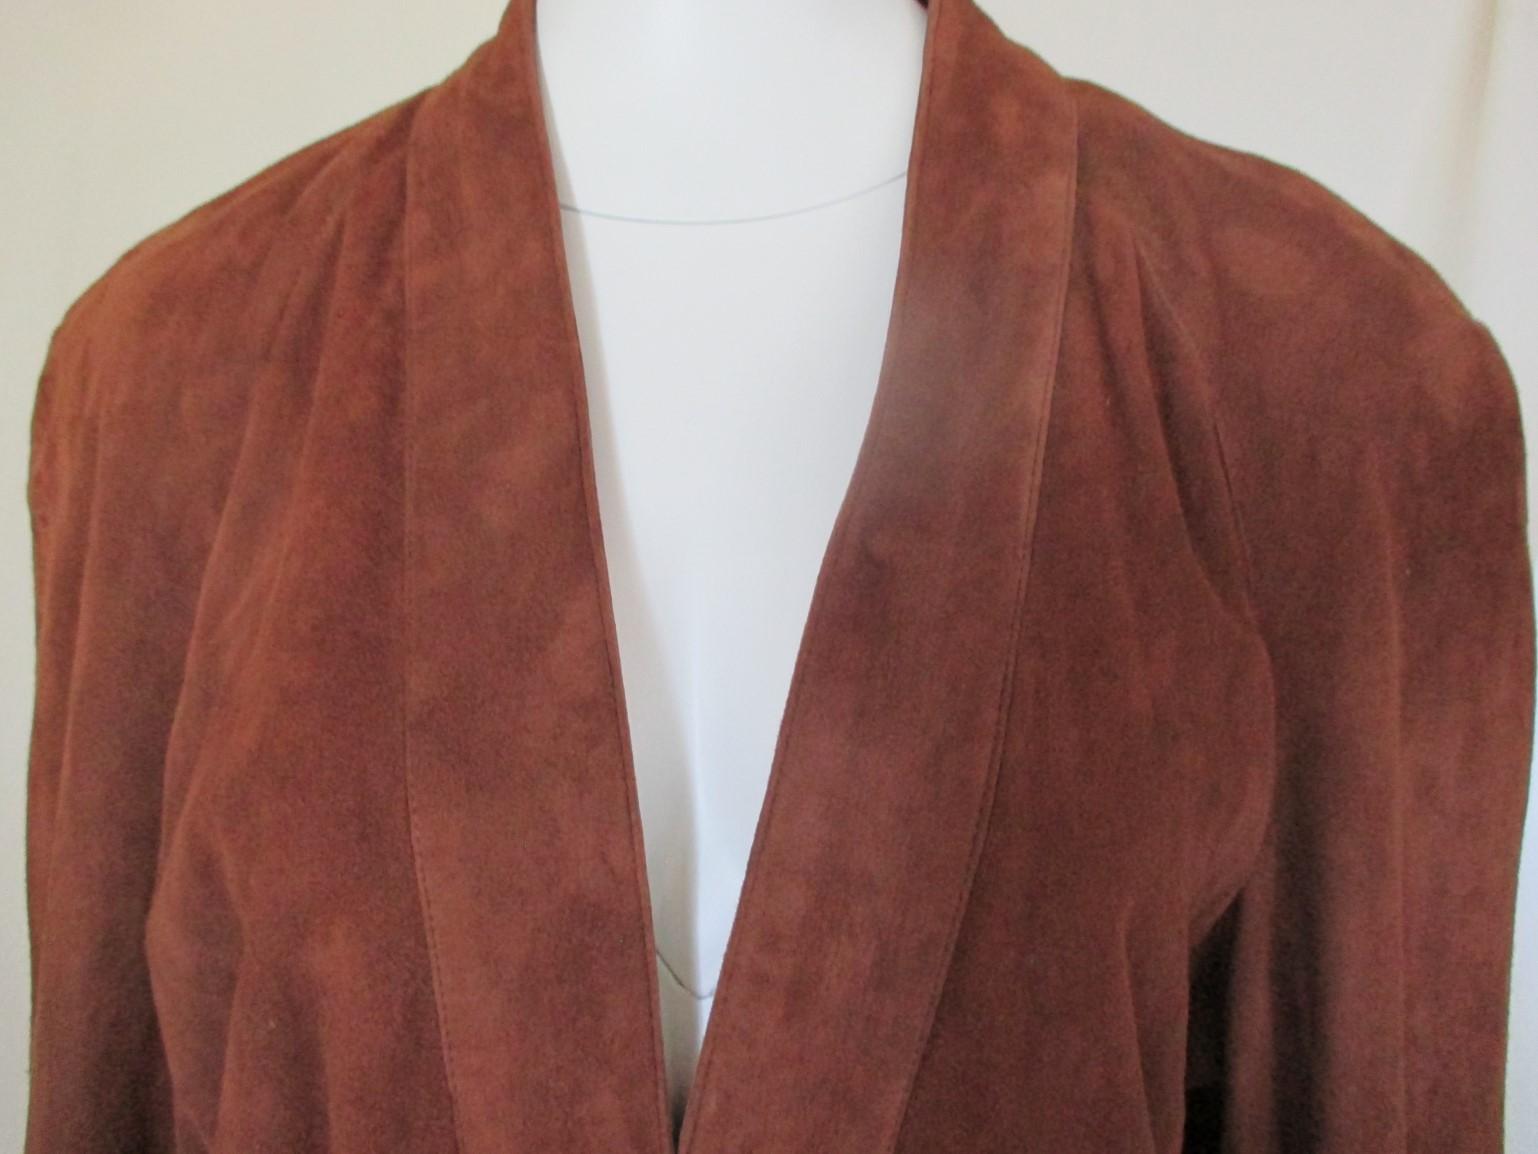 This vintage 90's Pierre Balmain, haute cuir coat is made of soft suede leather with 2 pockets and 2 inside closing hooks.
Color : brown
Size is mentioned EU 38 but fits like small (oversized) to medium.
Please note that vintage items are not new